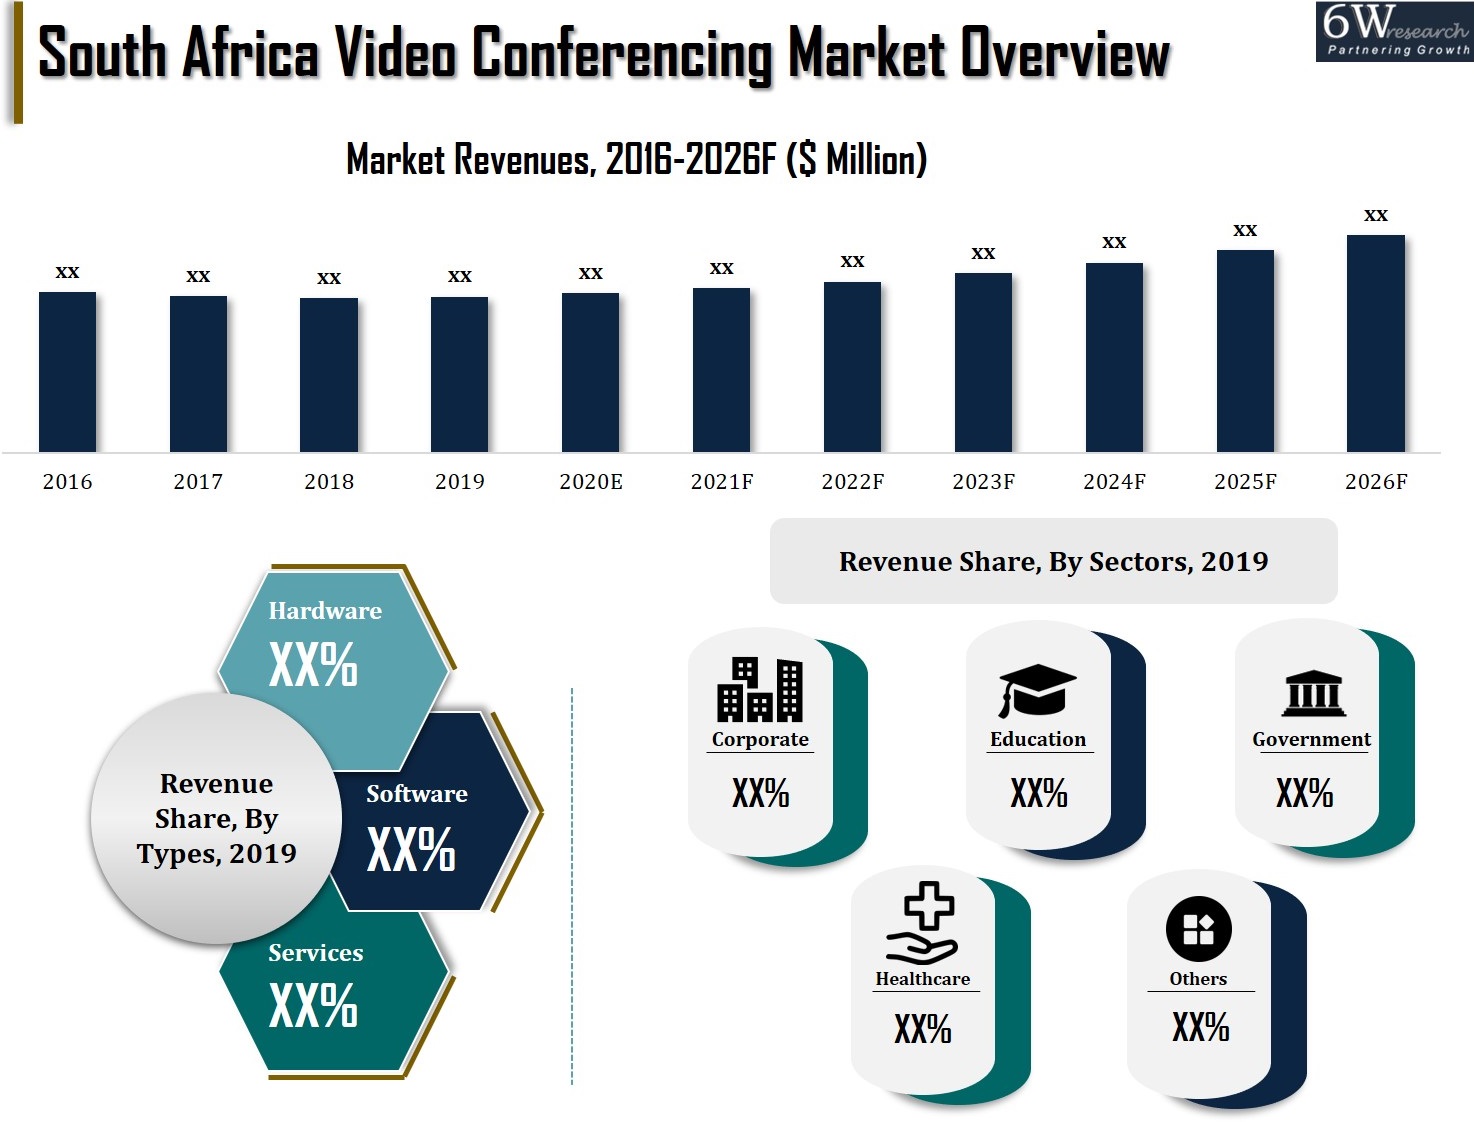 South Africa Video Conferencing Market Overview